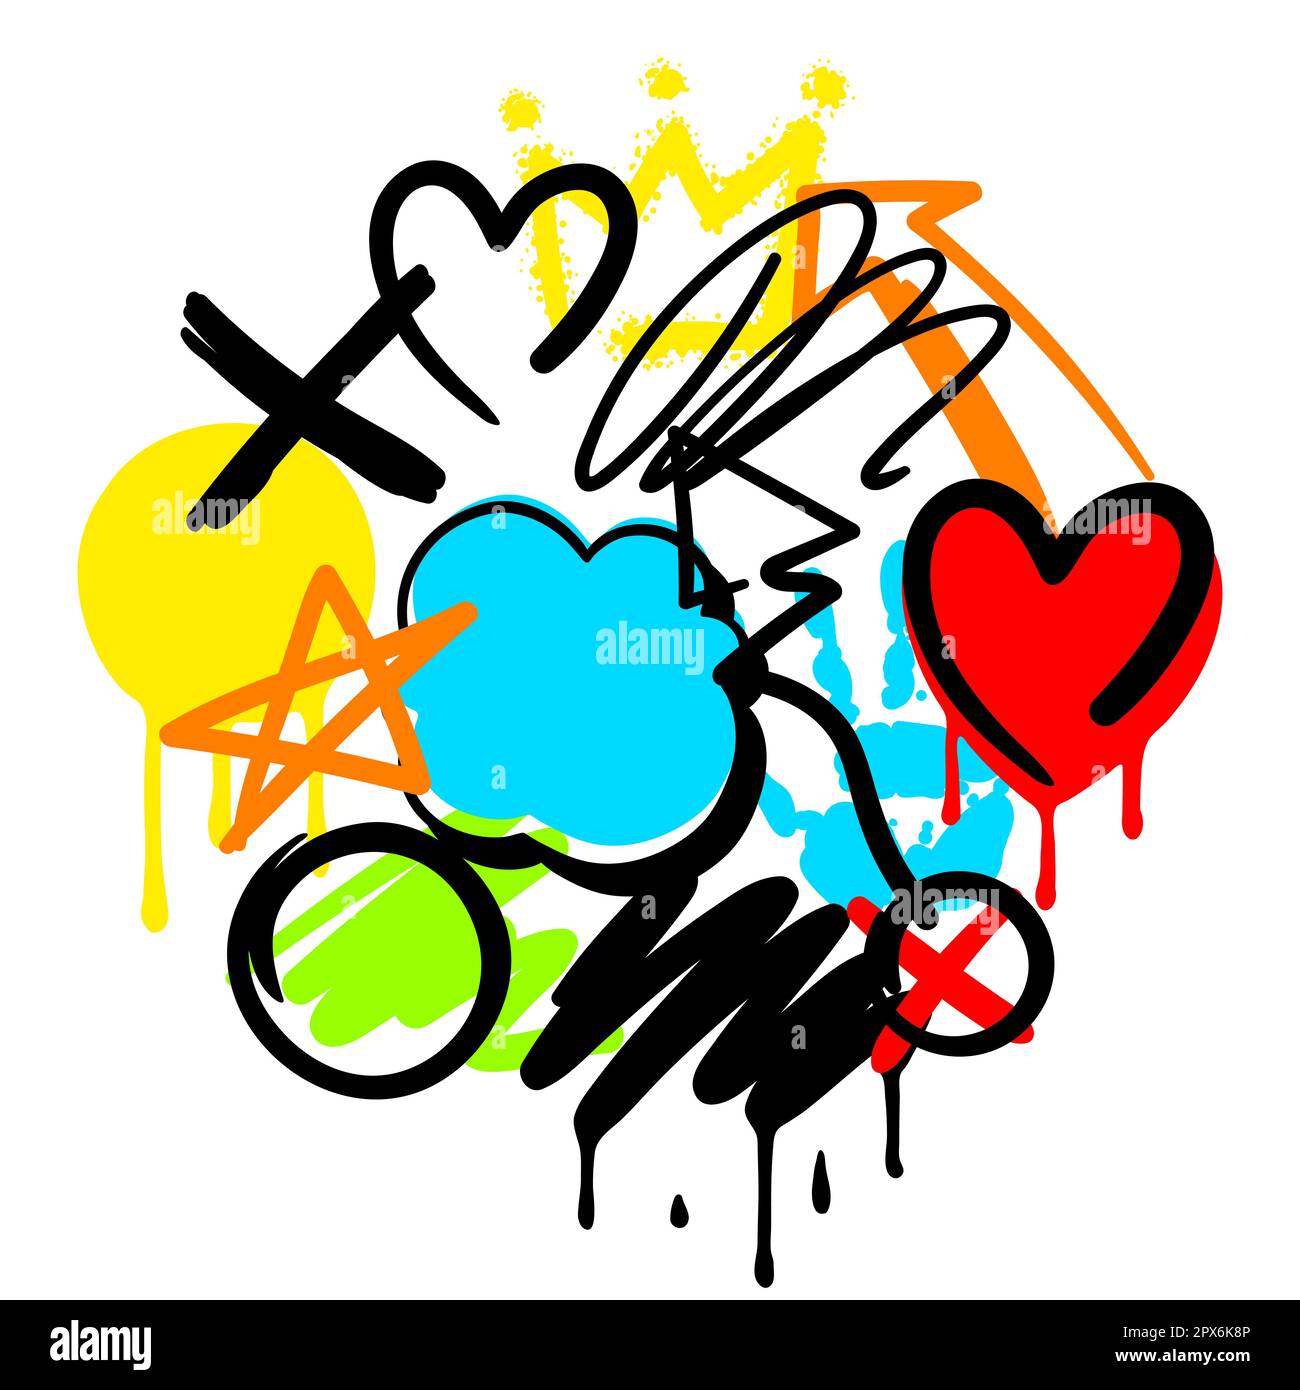 Background with graffiti symbols. Cartoon abstract grunge creative image. Stock Vector